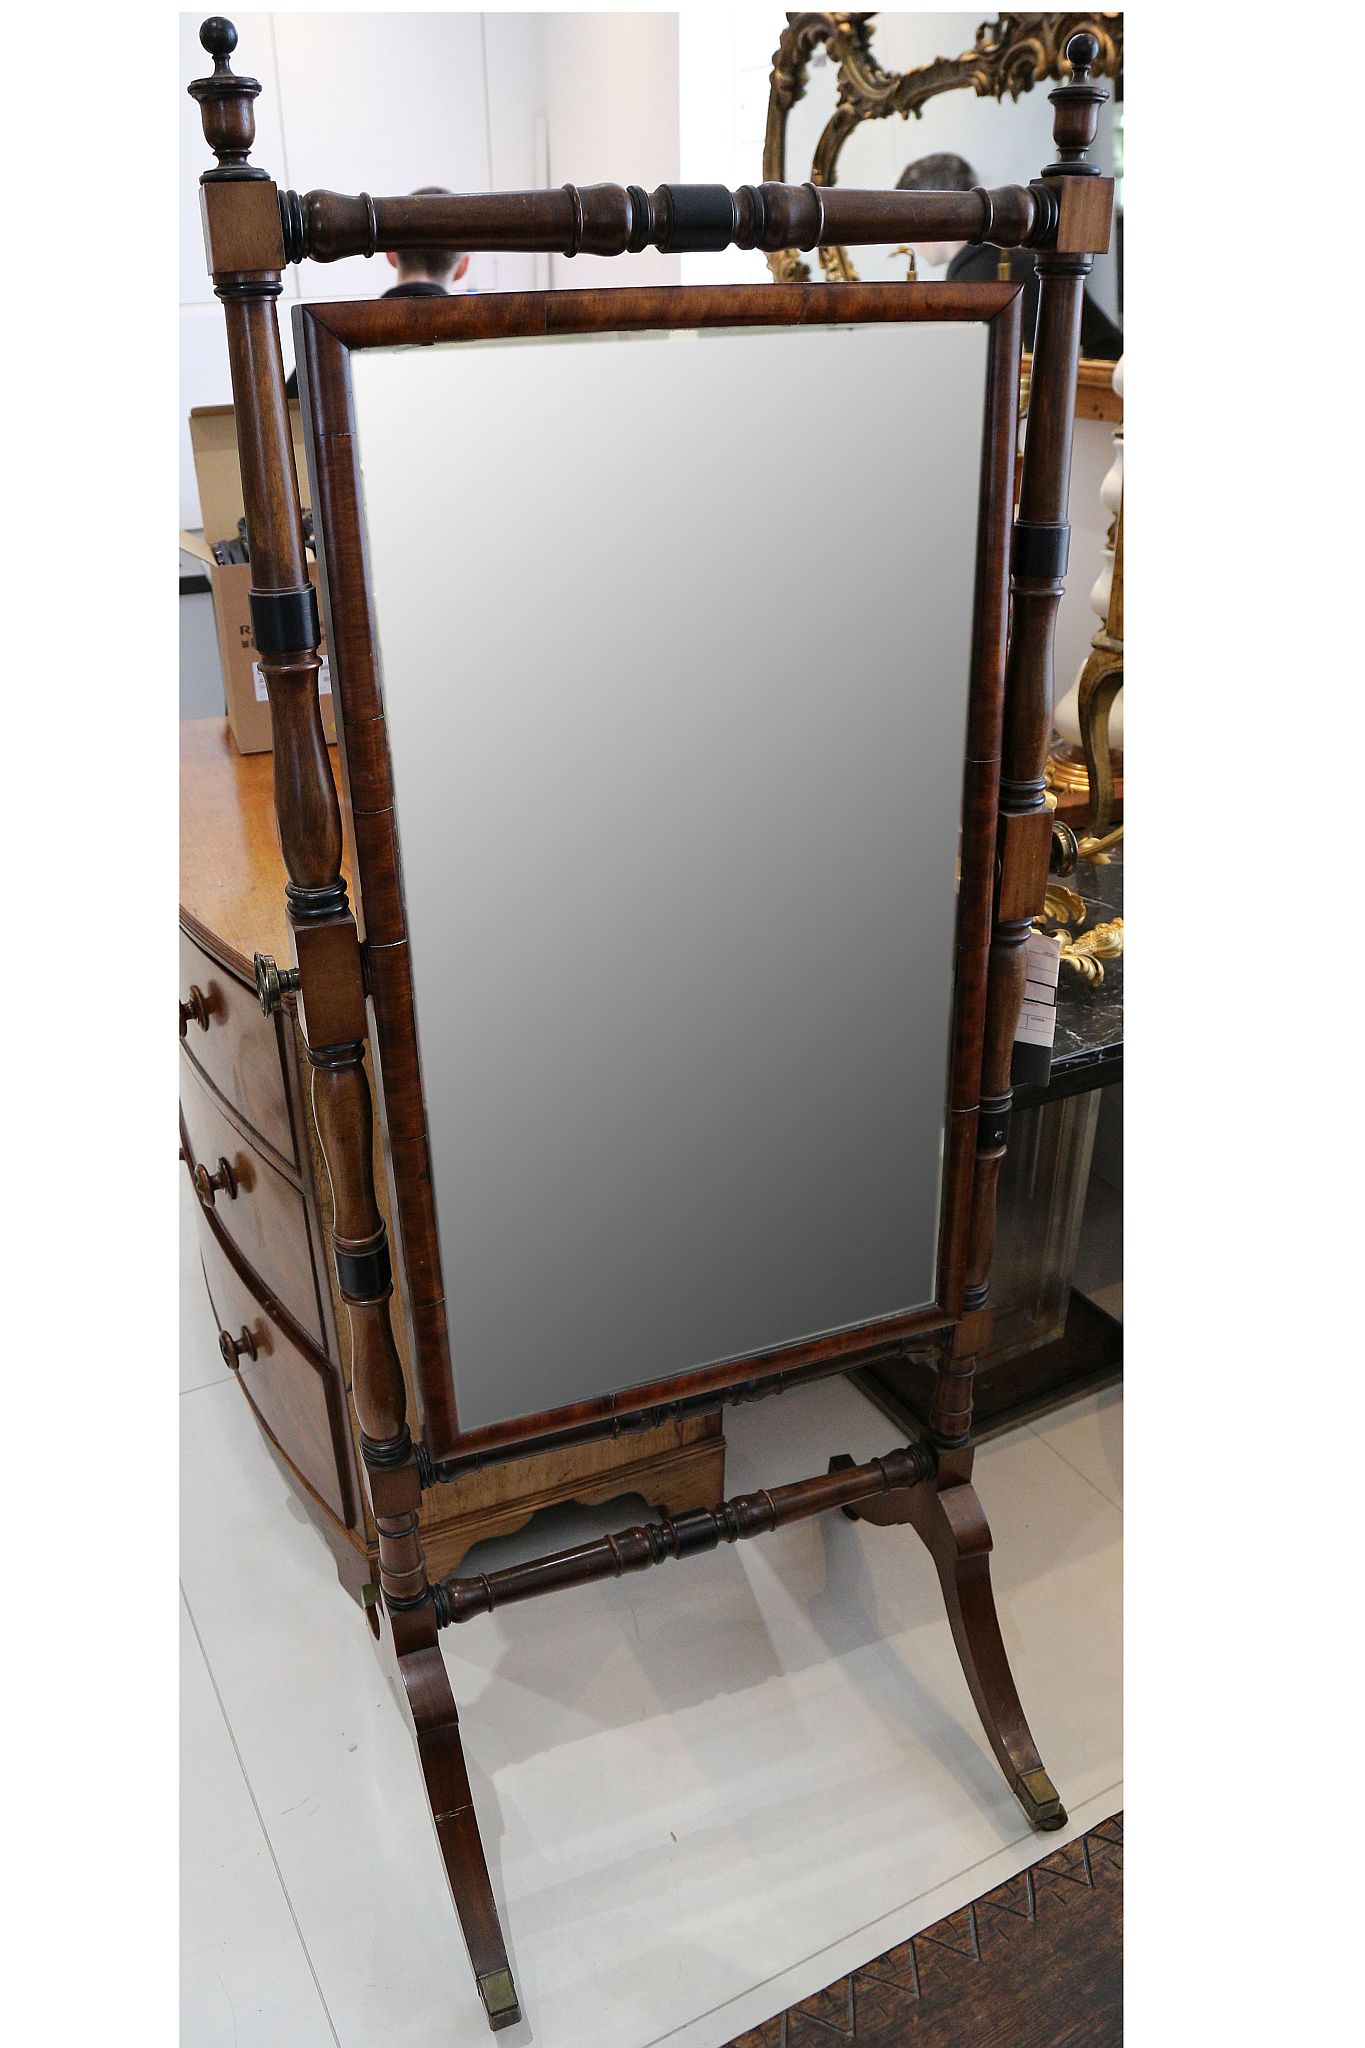 A William IV mahogany cheval mirror c.1835, the turned frame with ebonised sections terminating in